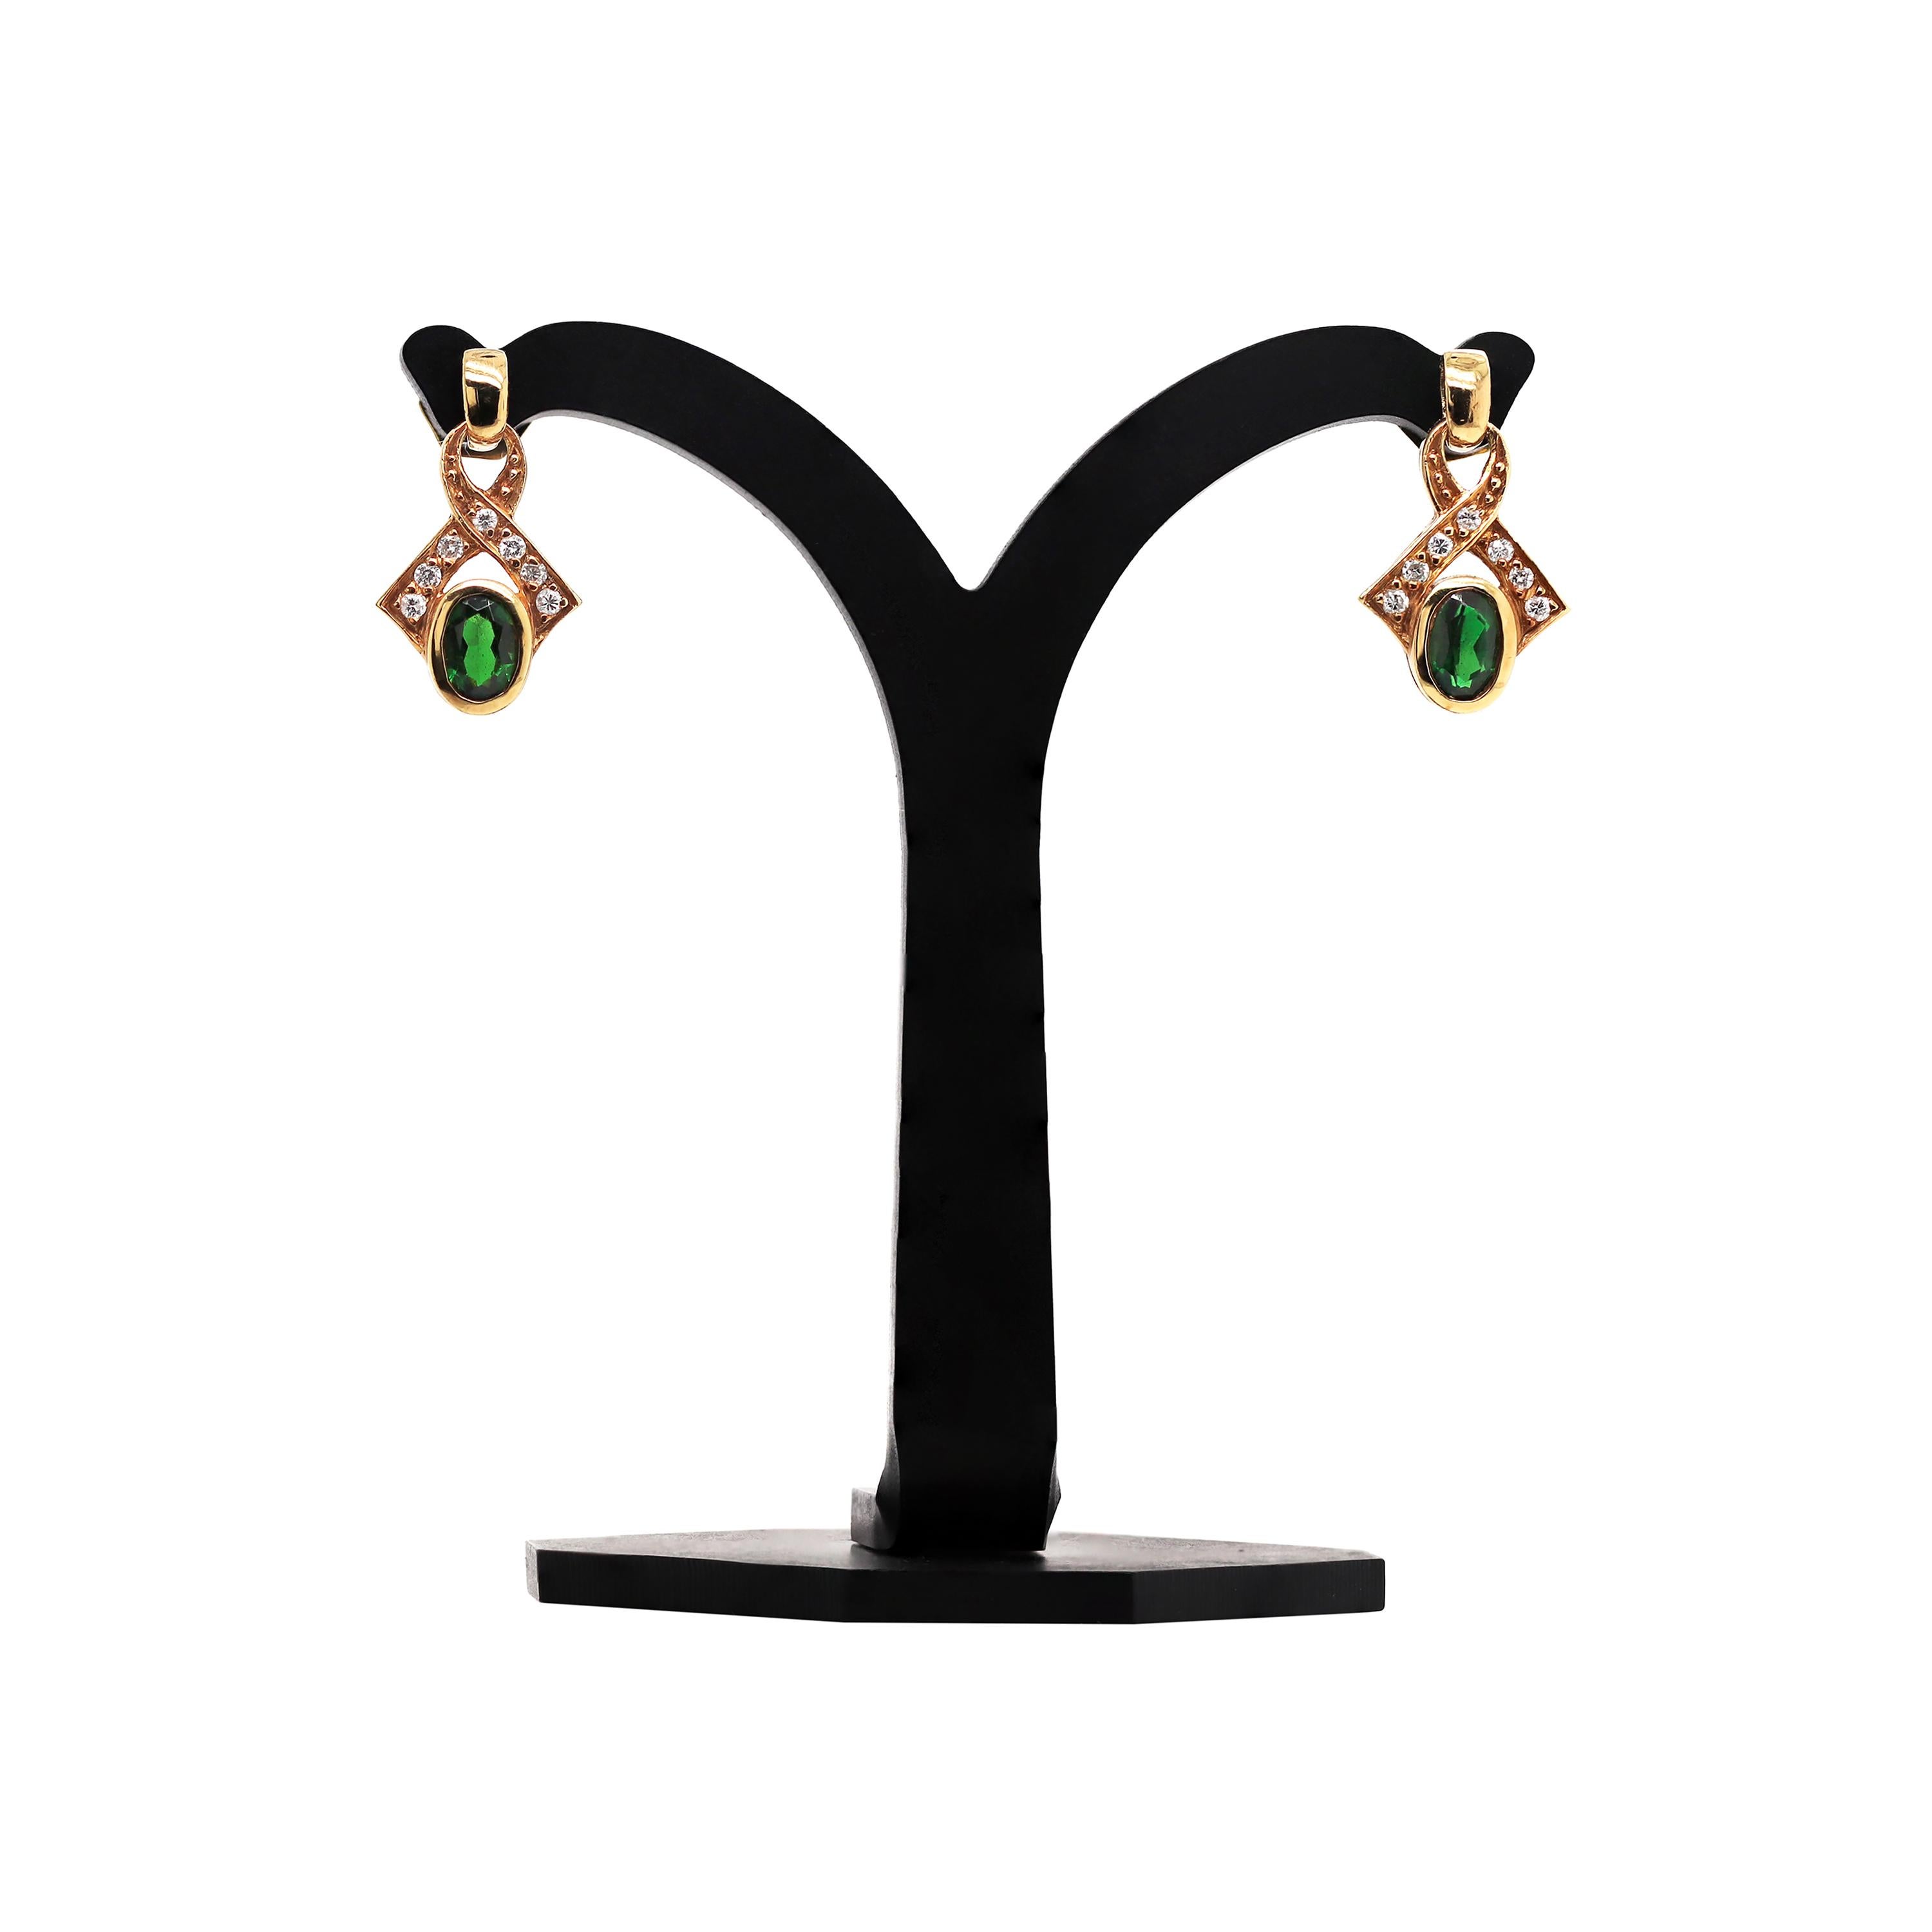 These lovely vintage earrings feature 7 round brilliant cut diamonds mounted on a twisted dangle ribbon, suspended from an elongated screw-back stud, weighing a total approximate weight of 0.24ct. A beautiful 4x6mm rubover set green tourmaline, with